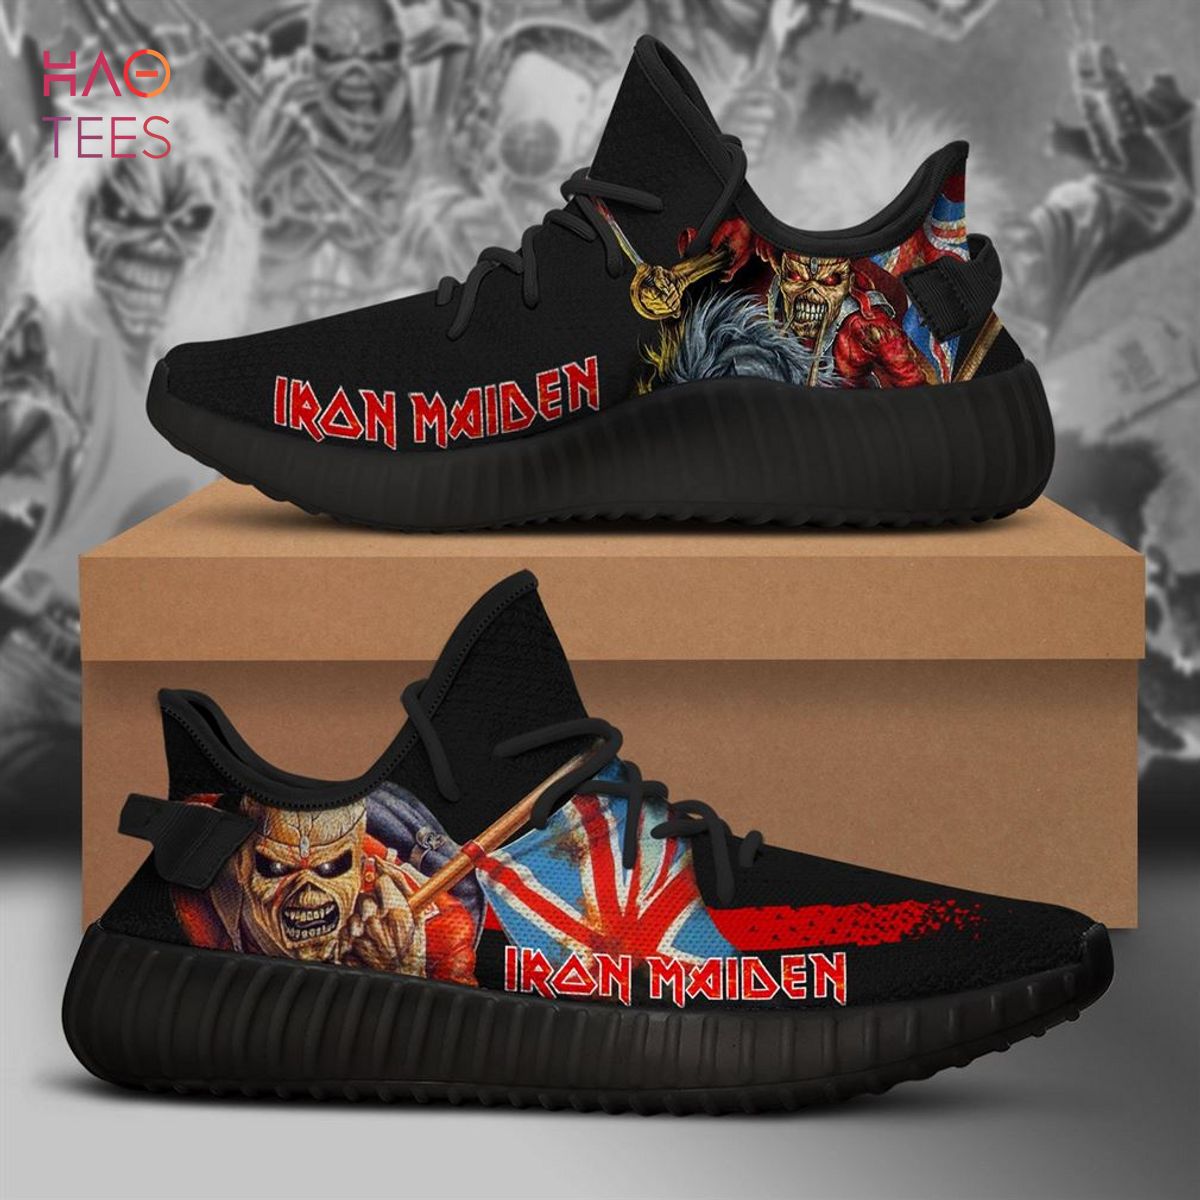 [TRENDDING] Iron Maiden Tropper Band Runing Yeezy Sneakers Shoes